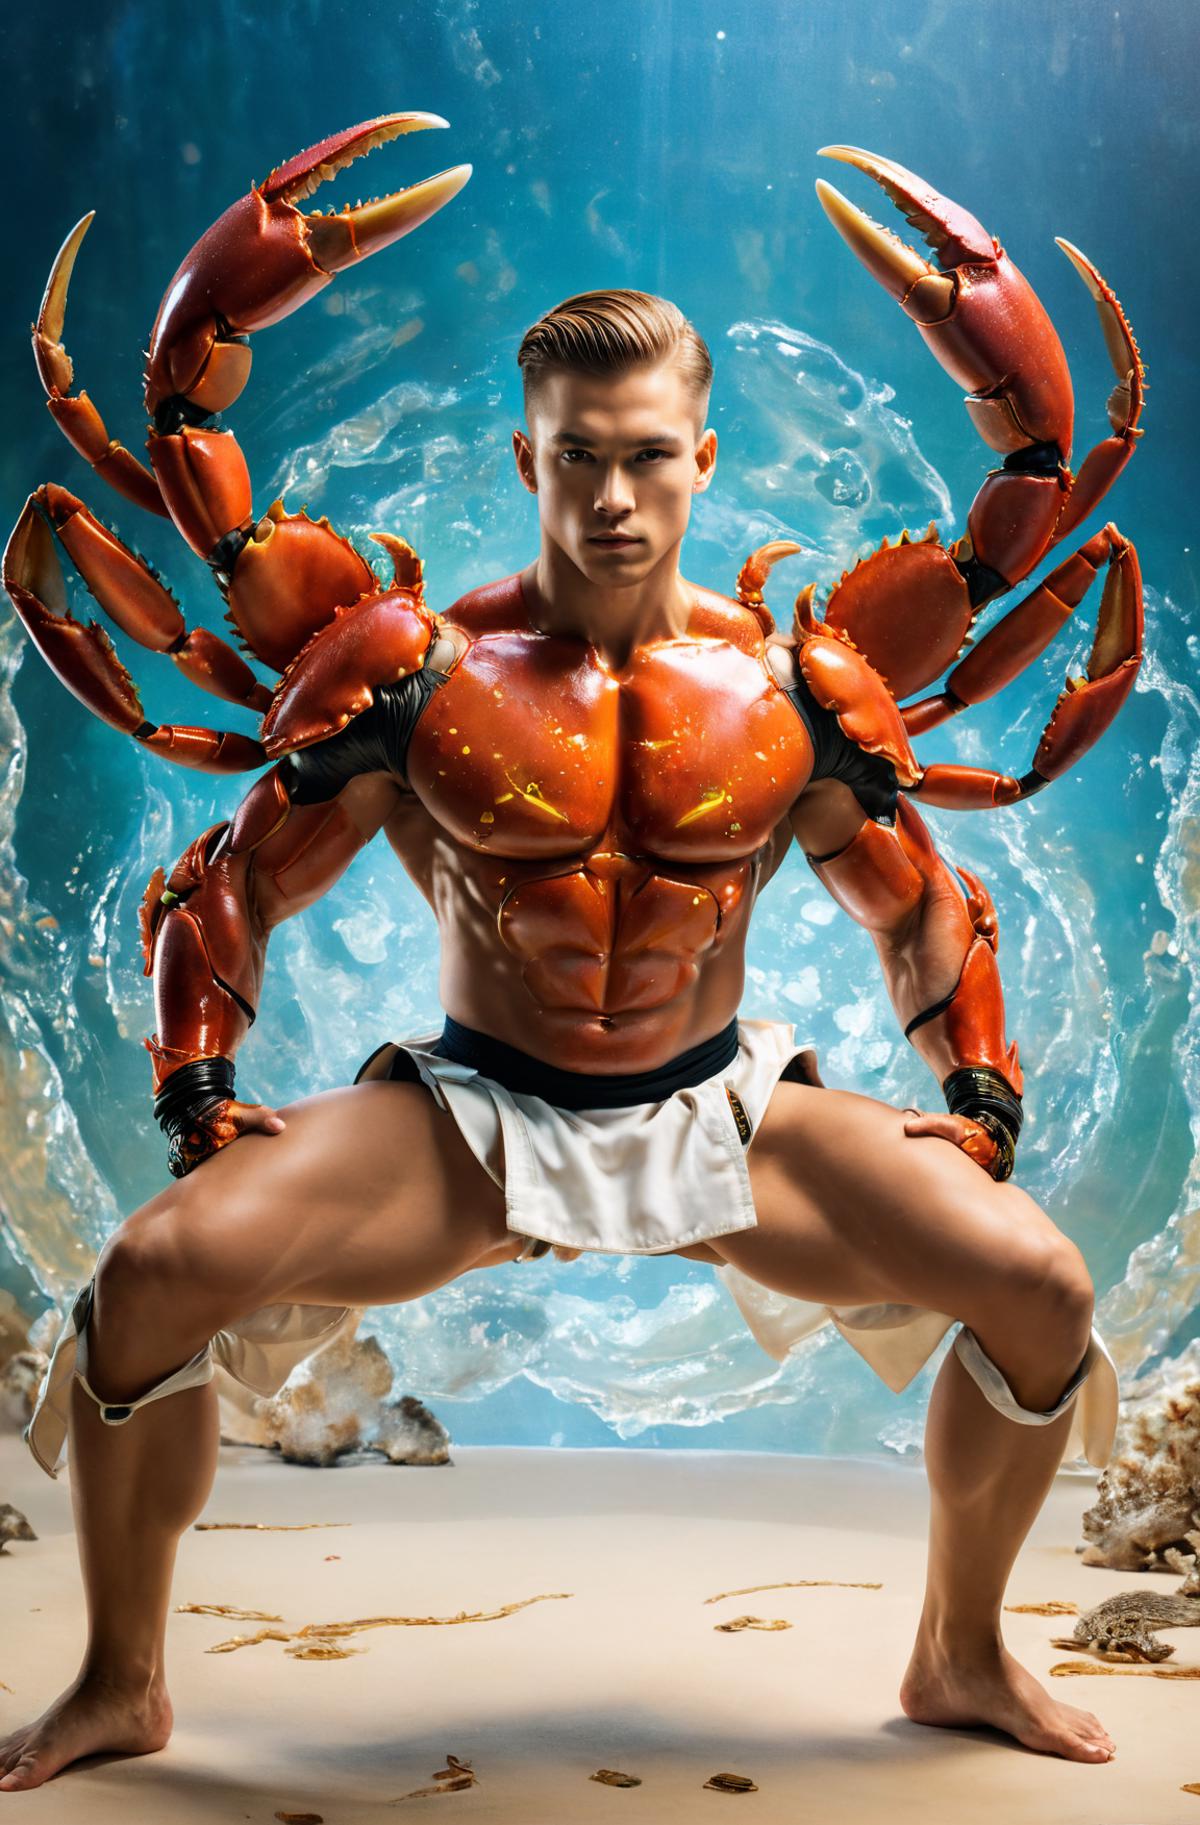 Man wearing a costume made of crab legs and claws posing in front of a blue background.